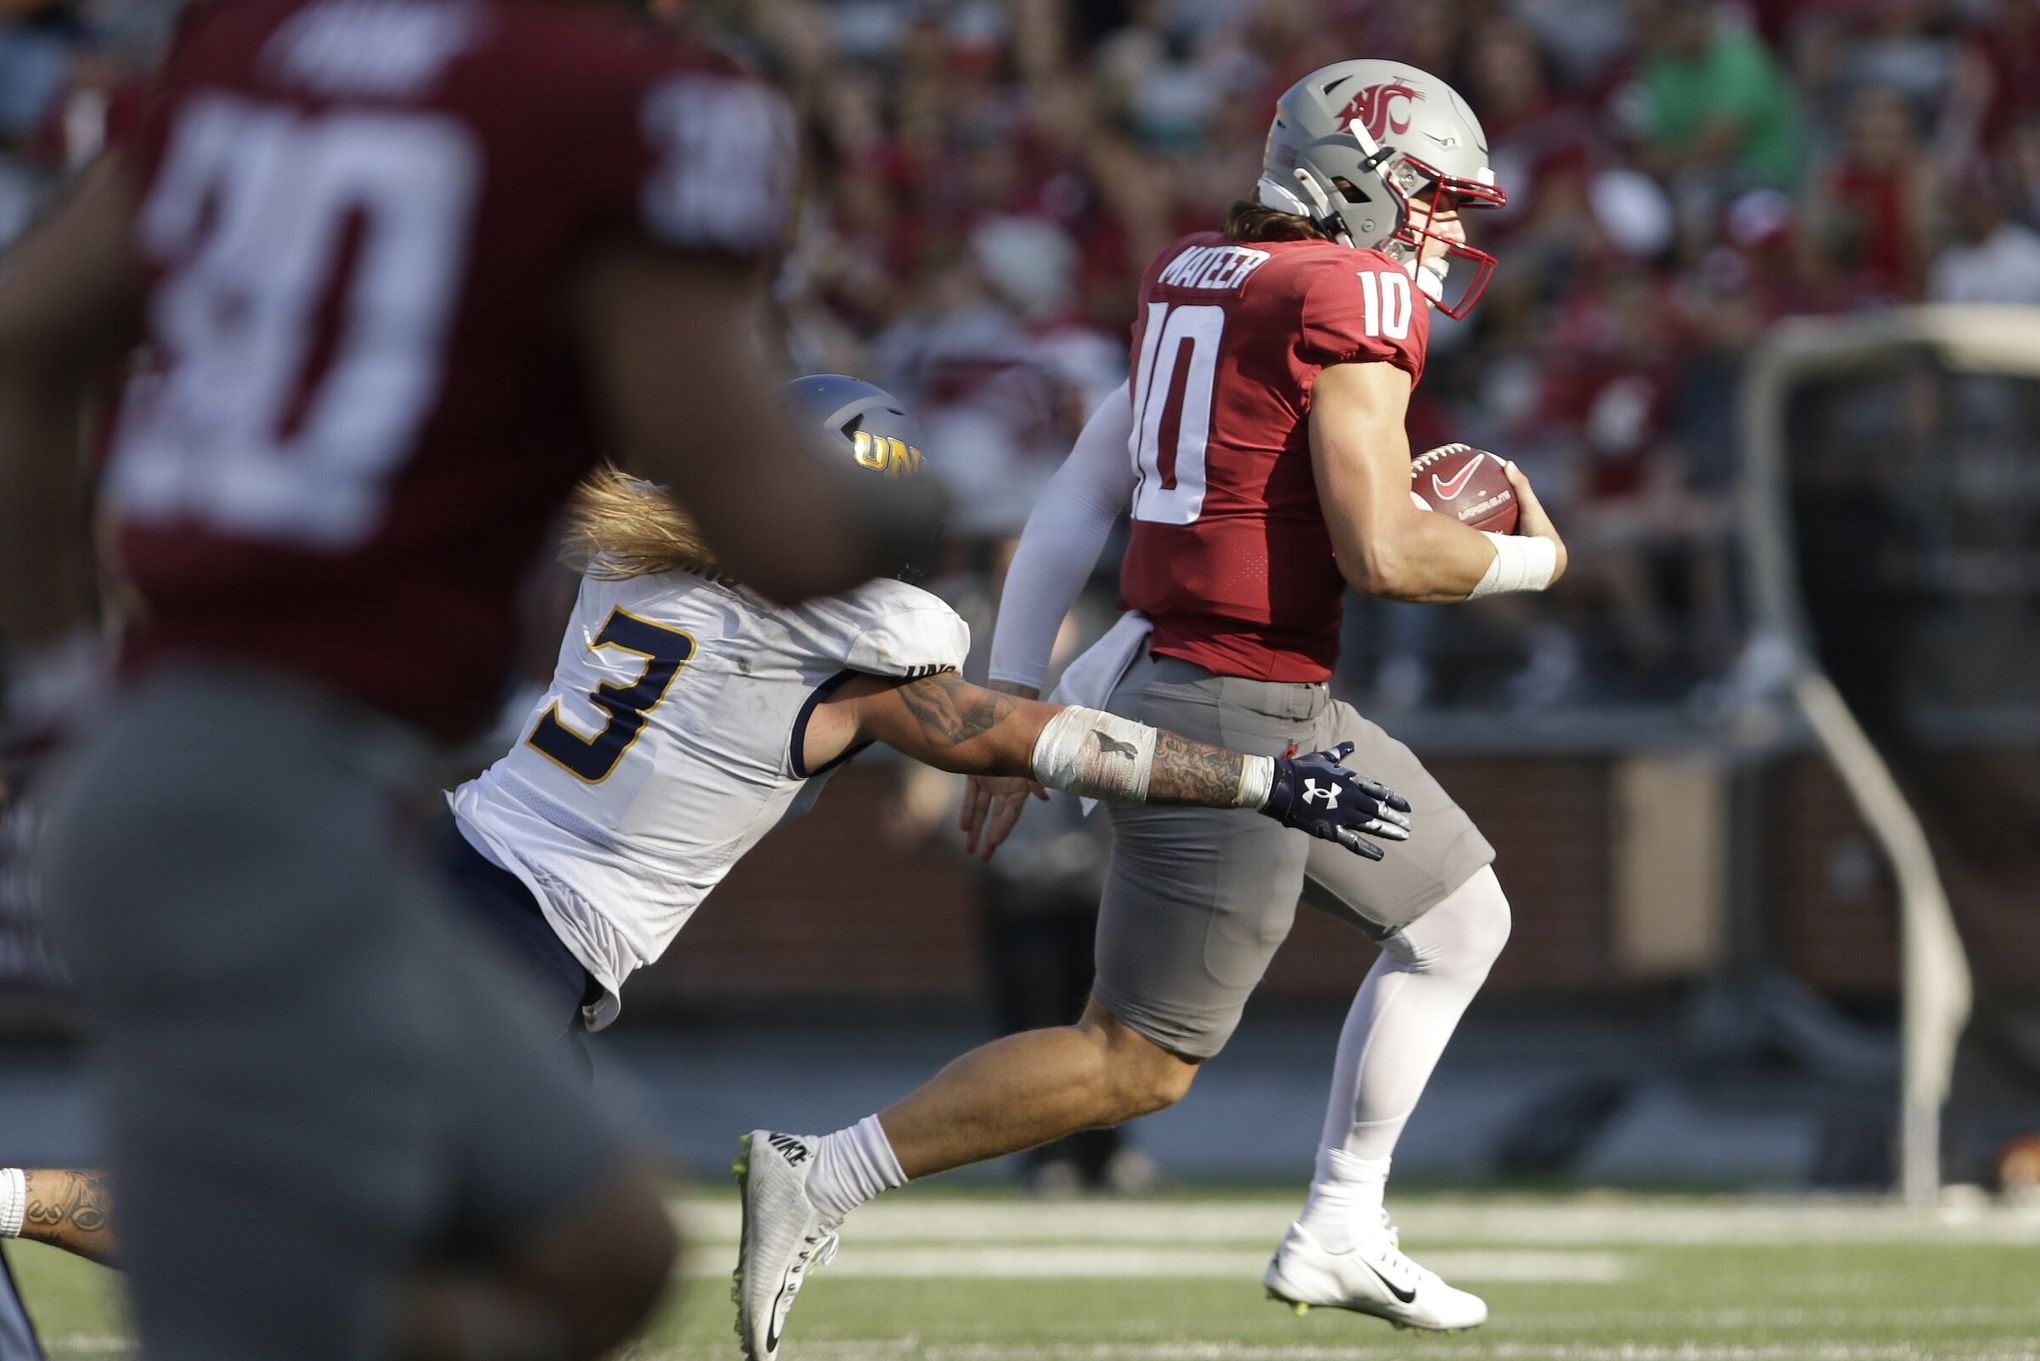 In win over Northern Colorado, WSU can learn something from backup QB John  Mateer